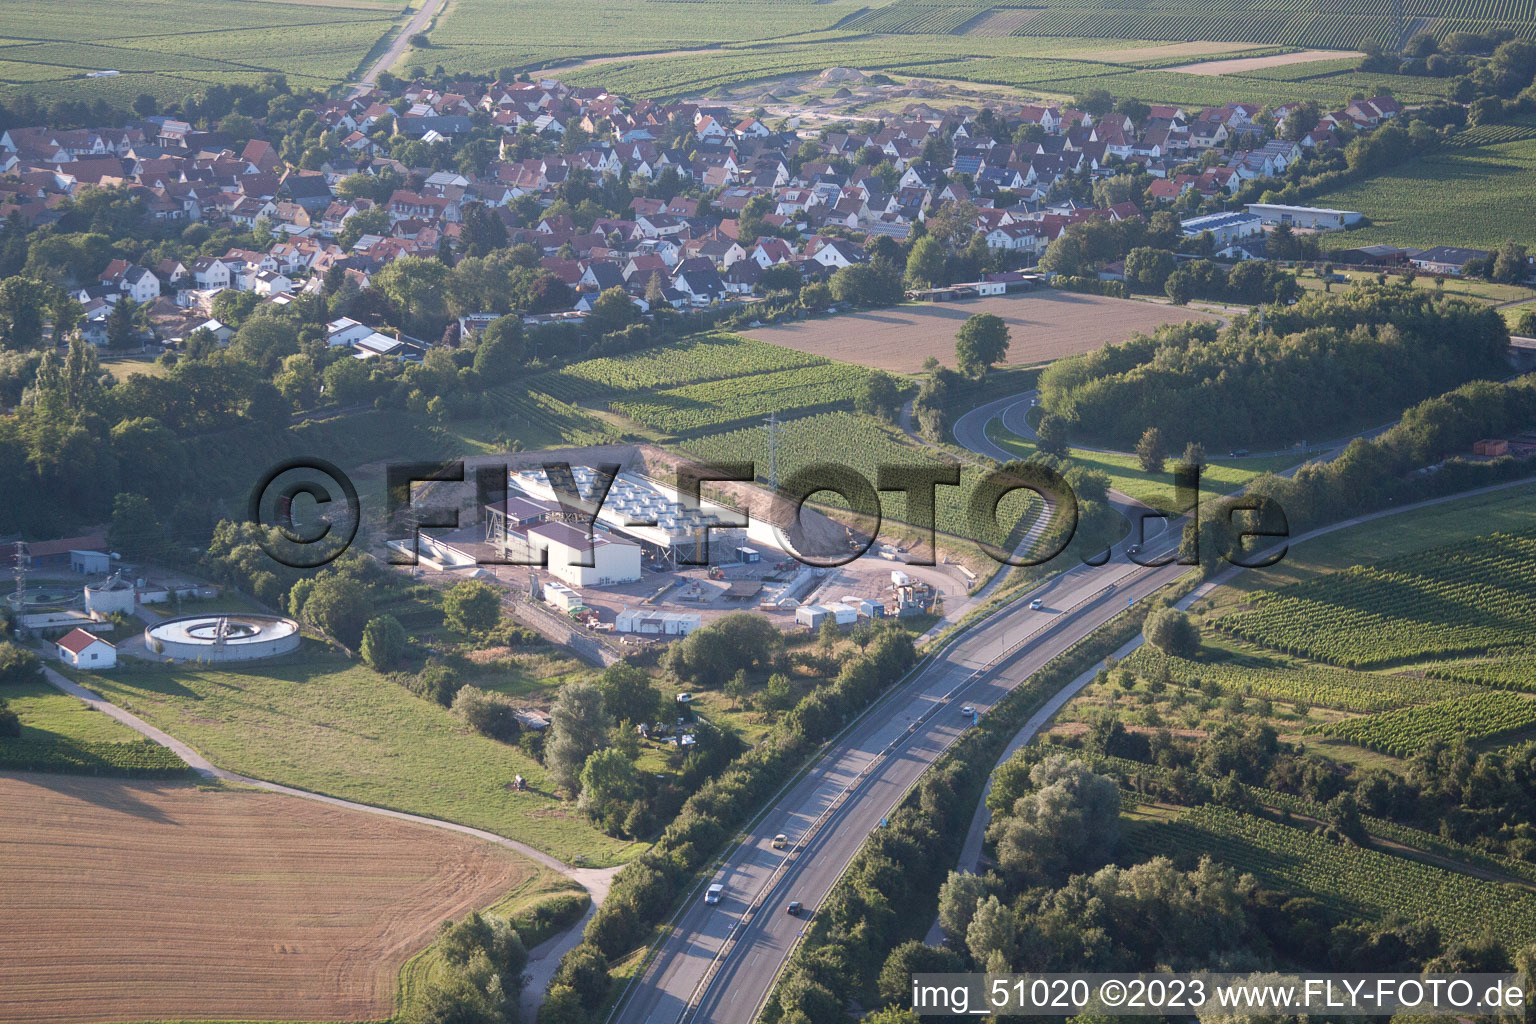 Geothermal energy plant from Pfalzwerke geofuture GmbH at Insheim on the A65 in Insheim in the state Rhineland-Palatinate, Germany from above